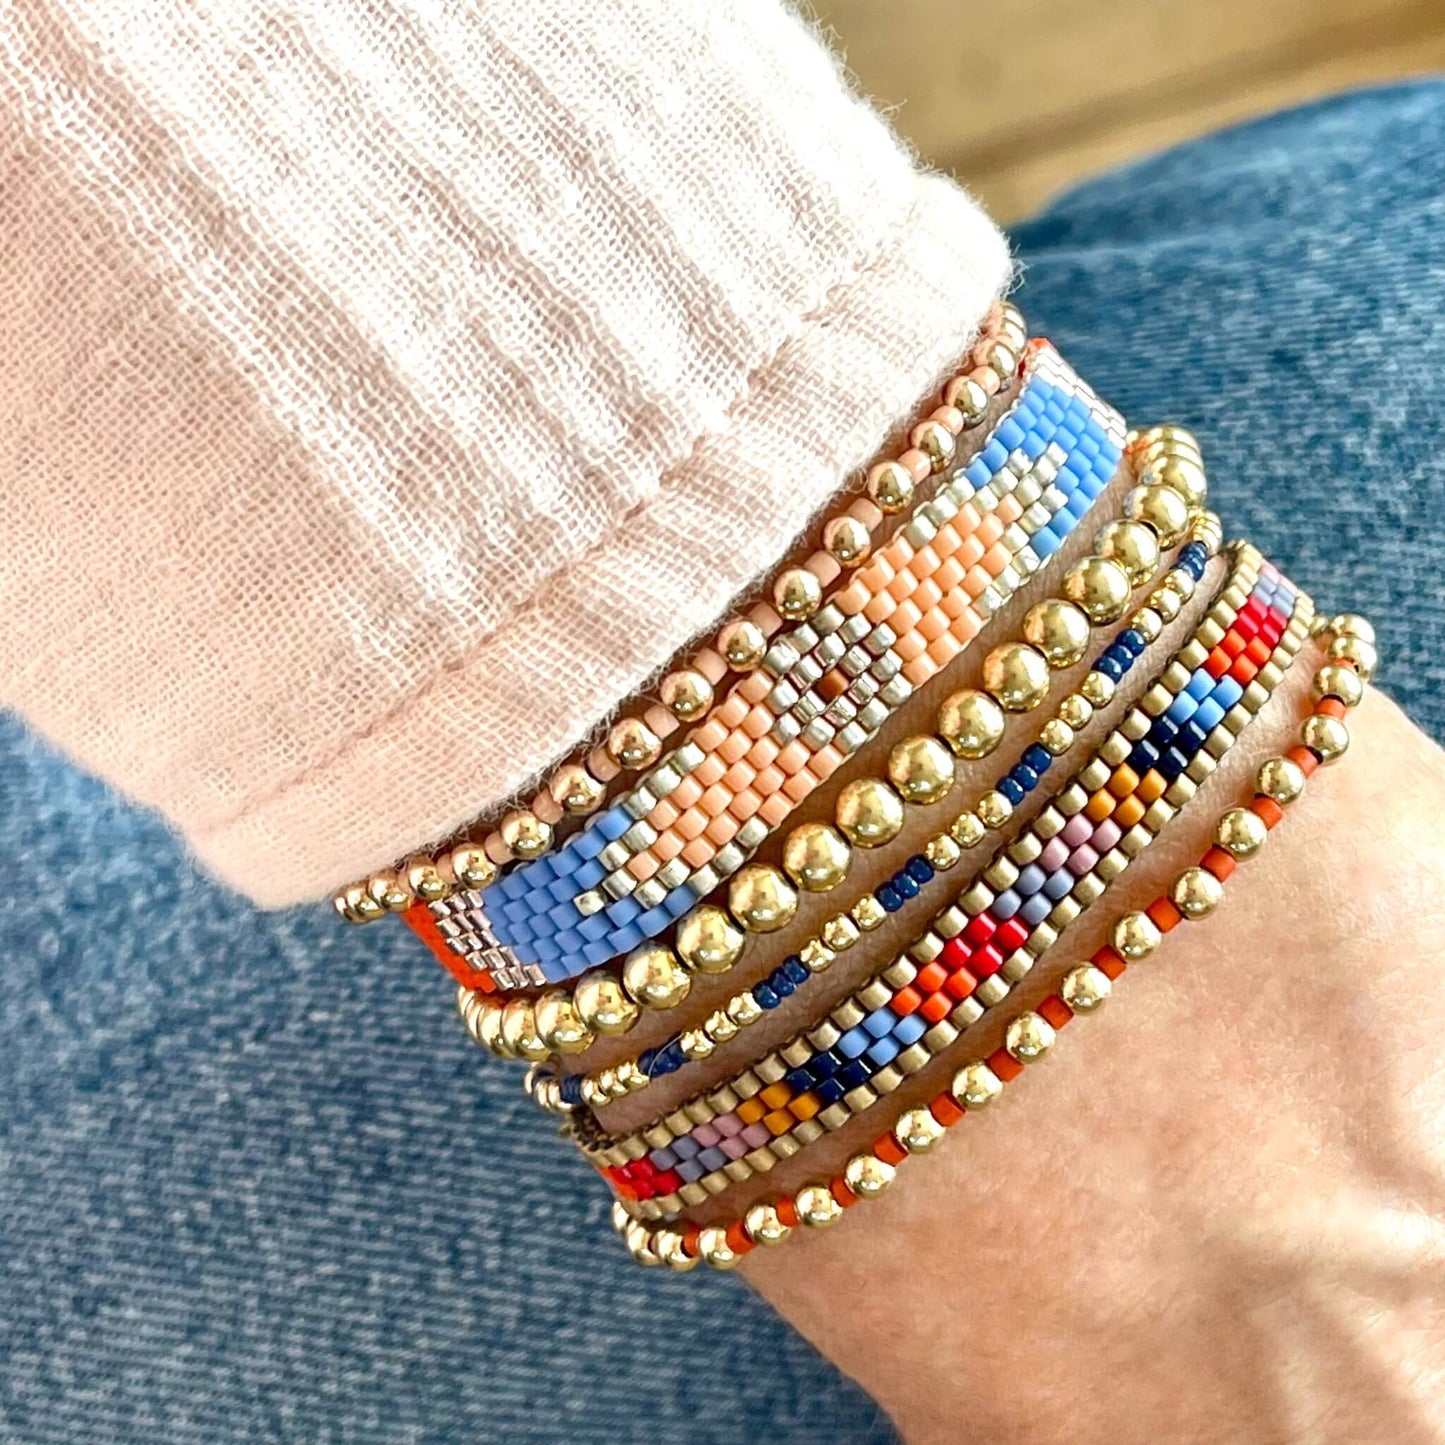 Gold southwest mix bracelet stack with 2 woven brands and 4 gold ball stretch bracelets. Handmade using orange, blue, red, and peach seed beads.